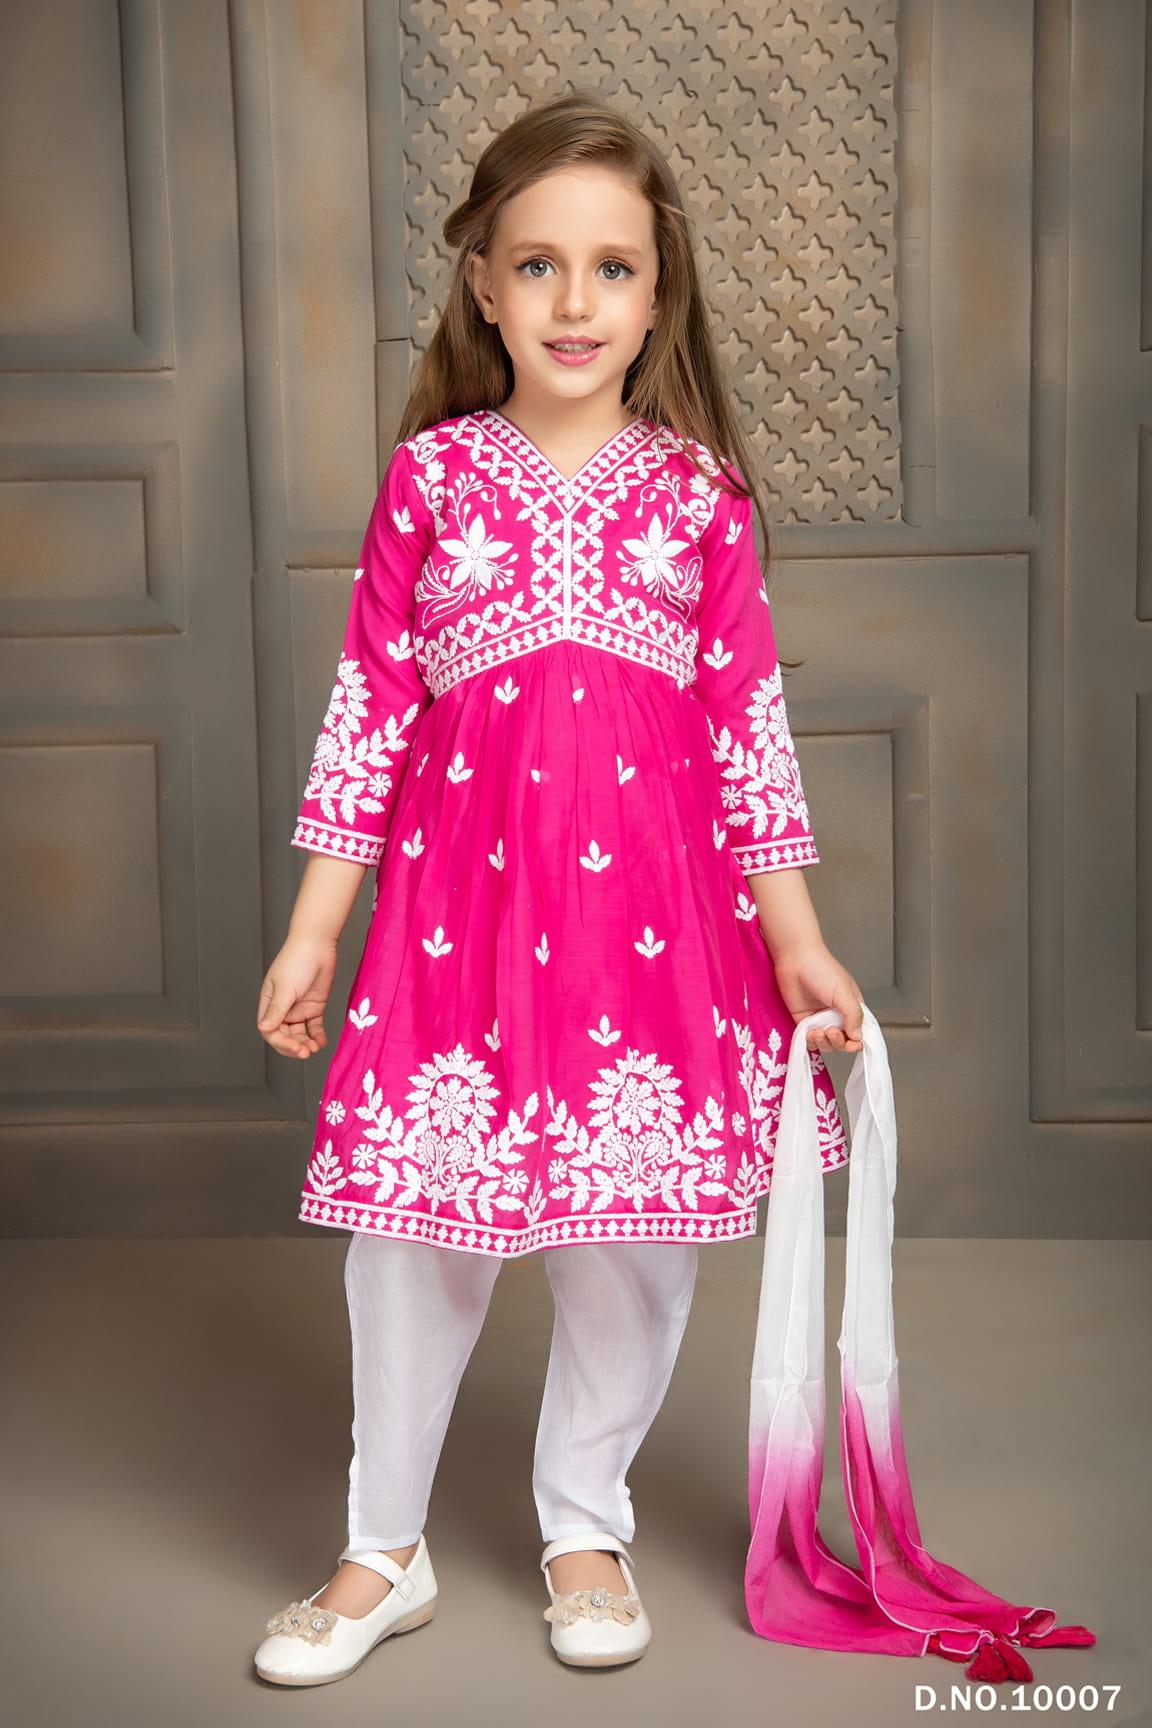 Pink Salwar Set With White Embroidery For Girls - Lagorii Kids